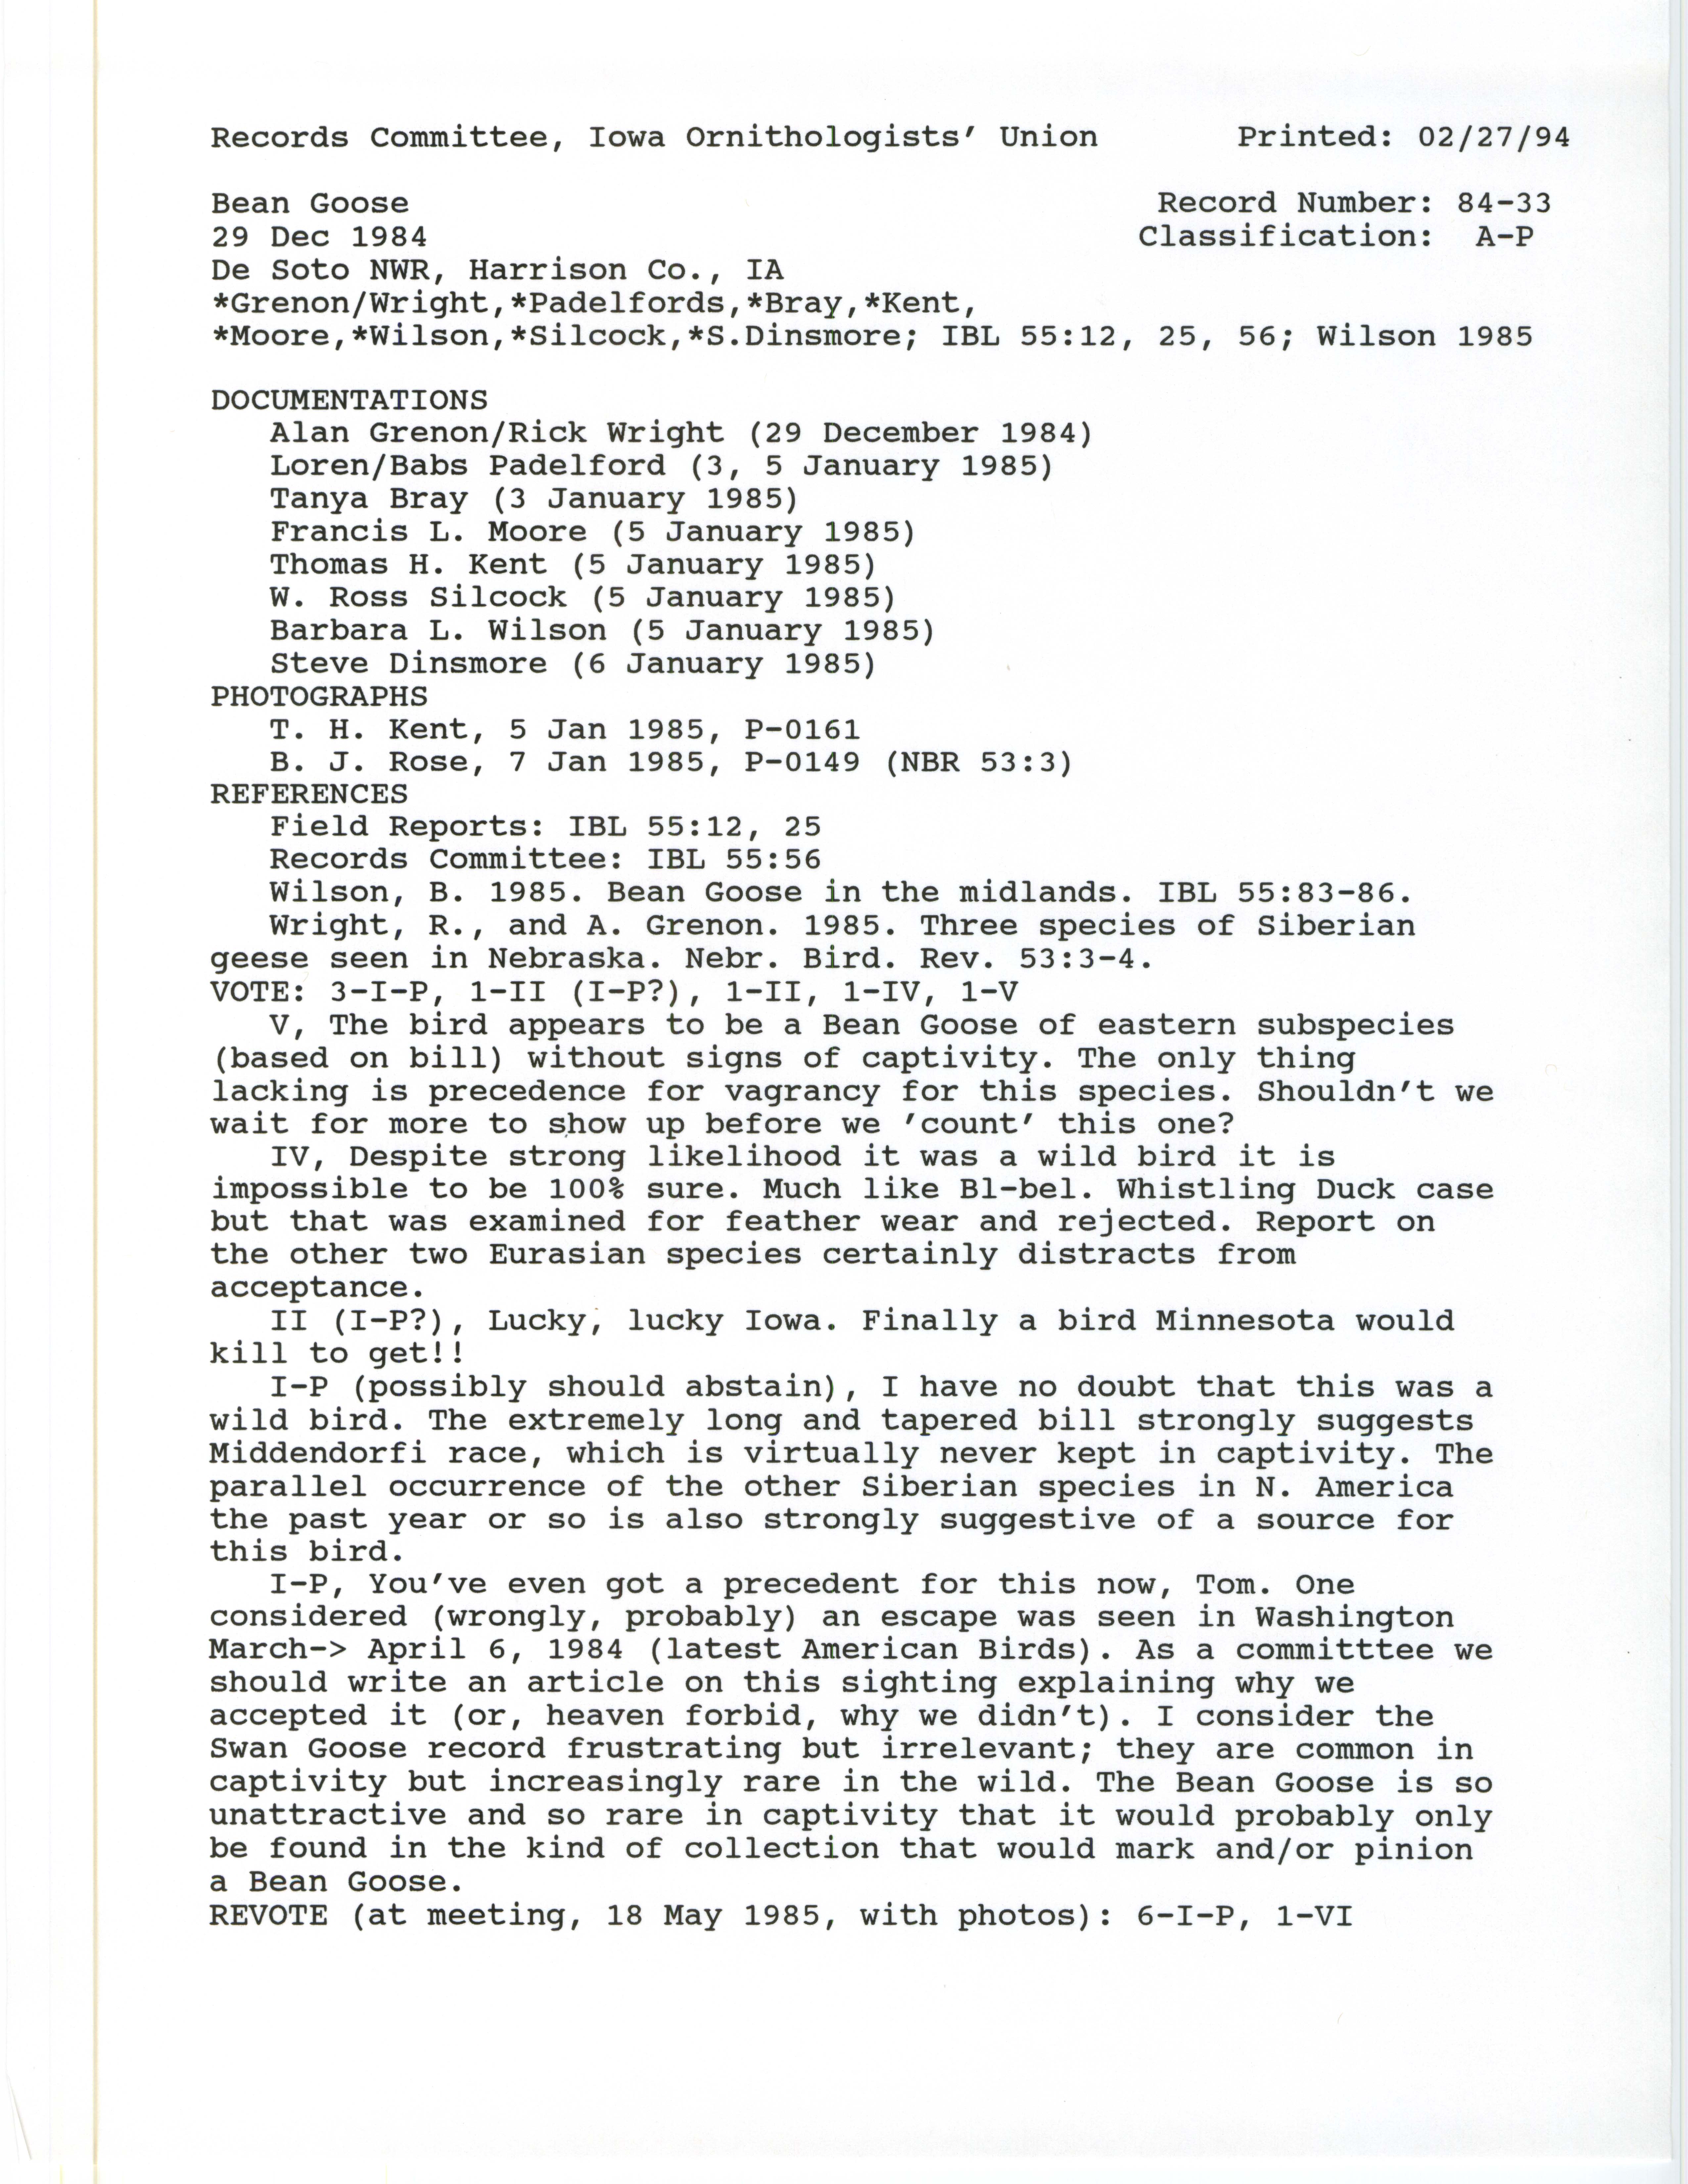 Records Committee review for rare bird sighting of Bean Goose at DeSoto National Wildlife Refuge, 1984